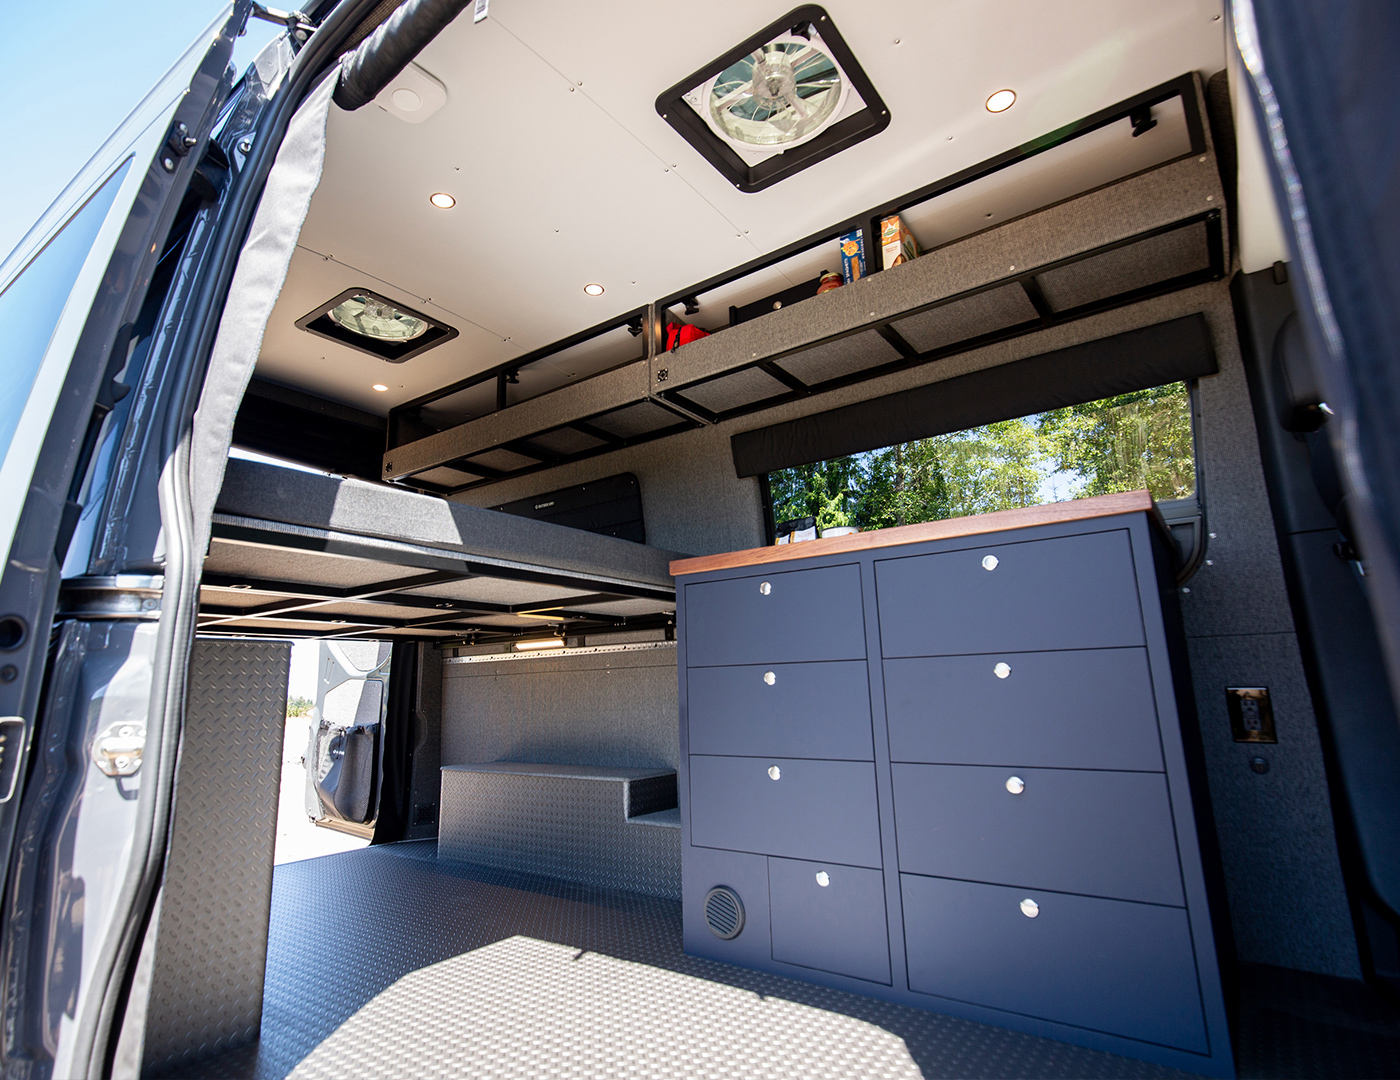 Wide interior image of converted 144 sprinter van with blue cabinetry and white ceiling